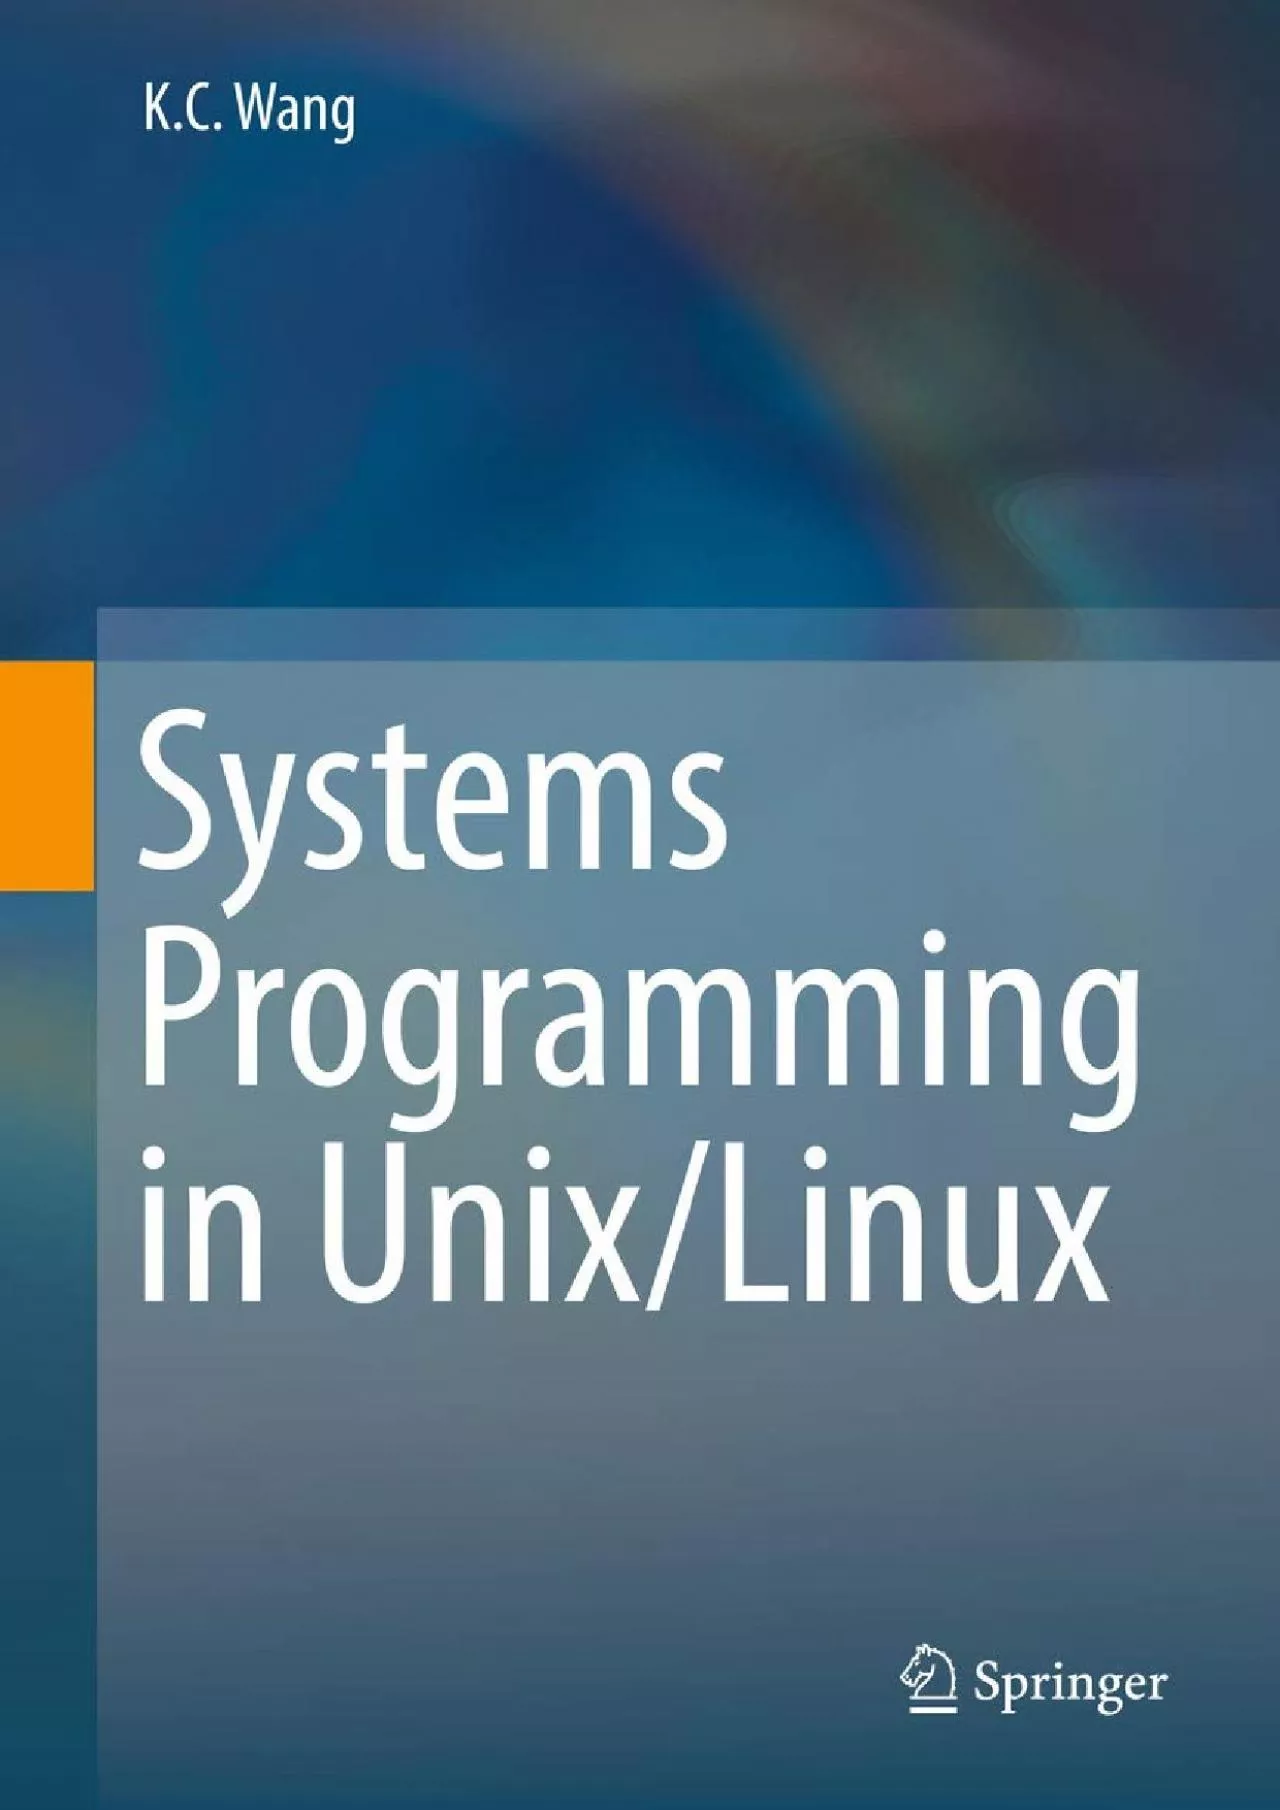 [FREE]-Systems Programming in Unix/Linux